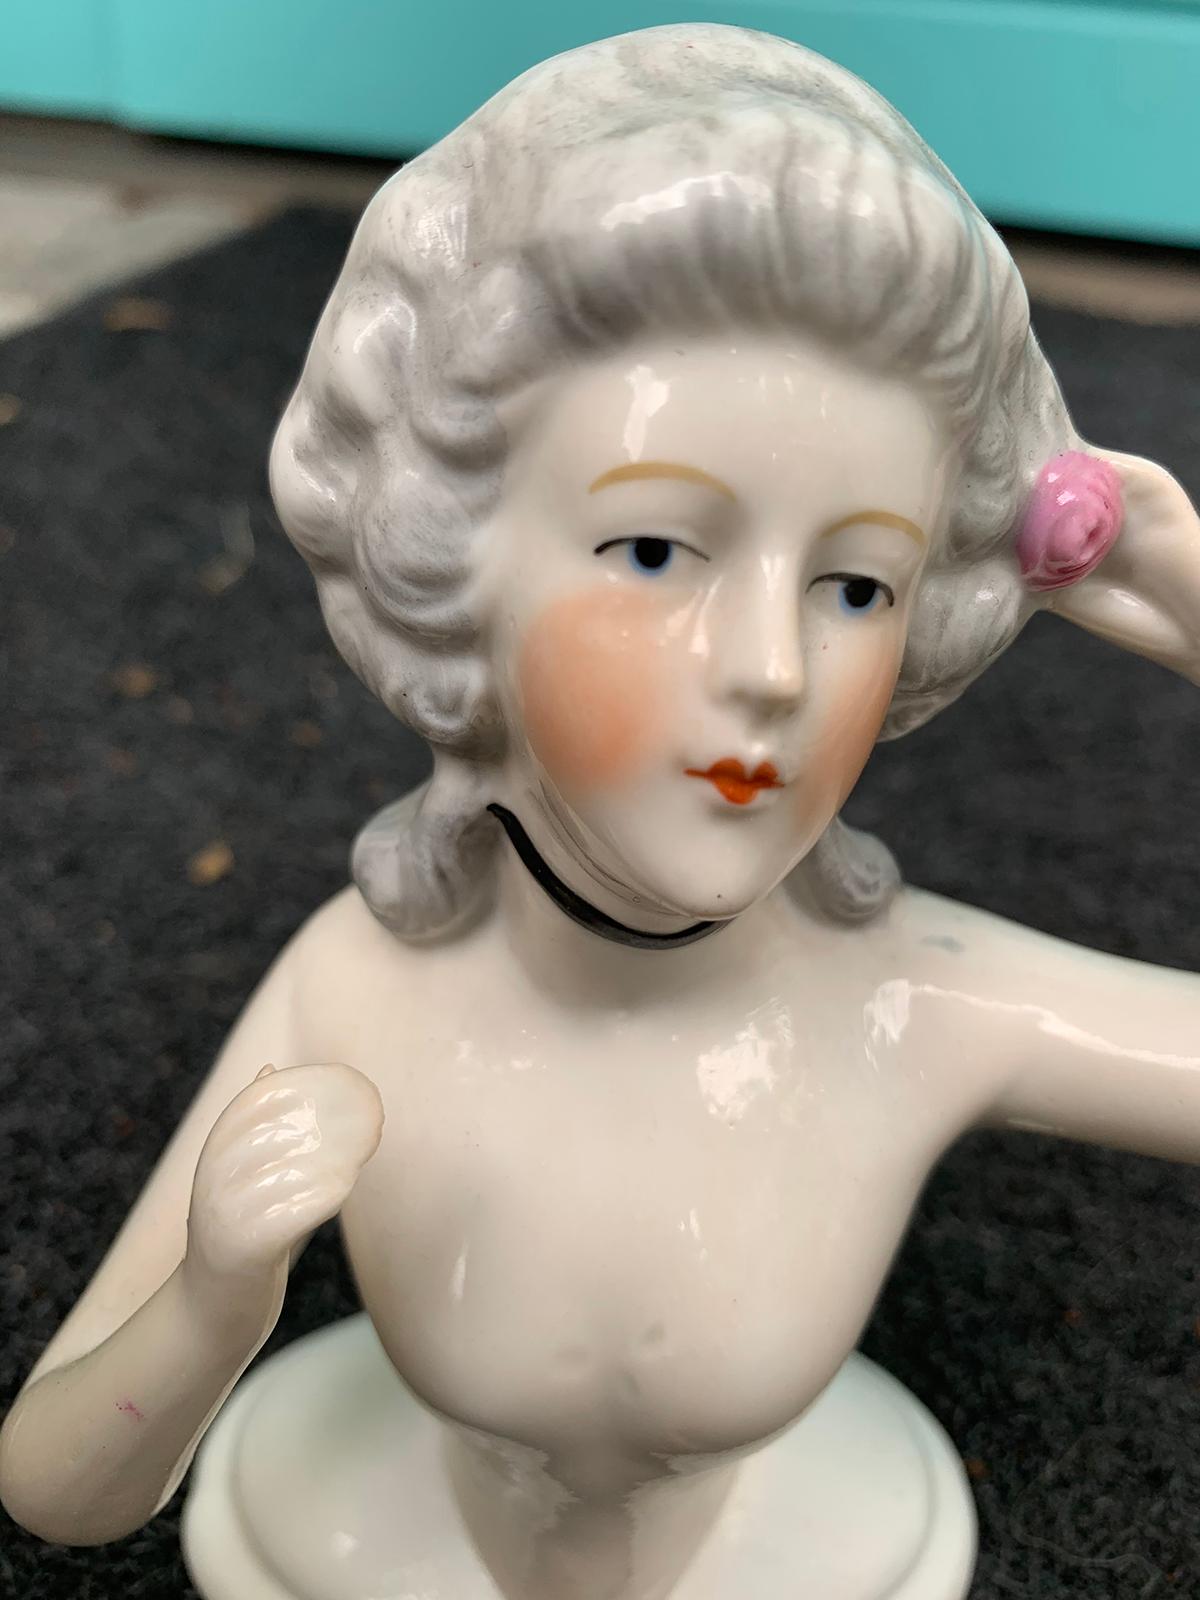 Early 20th Century German Porcelain Marie Antoinette Style Half-Doll Figure For Sale 2